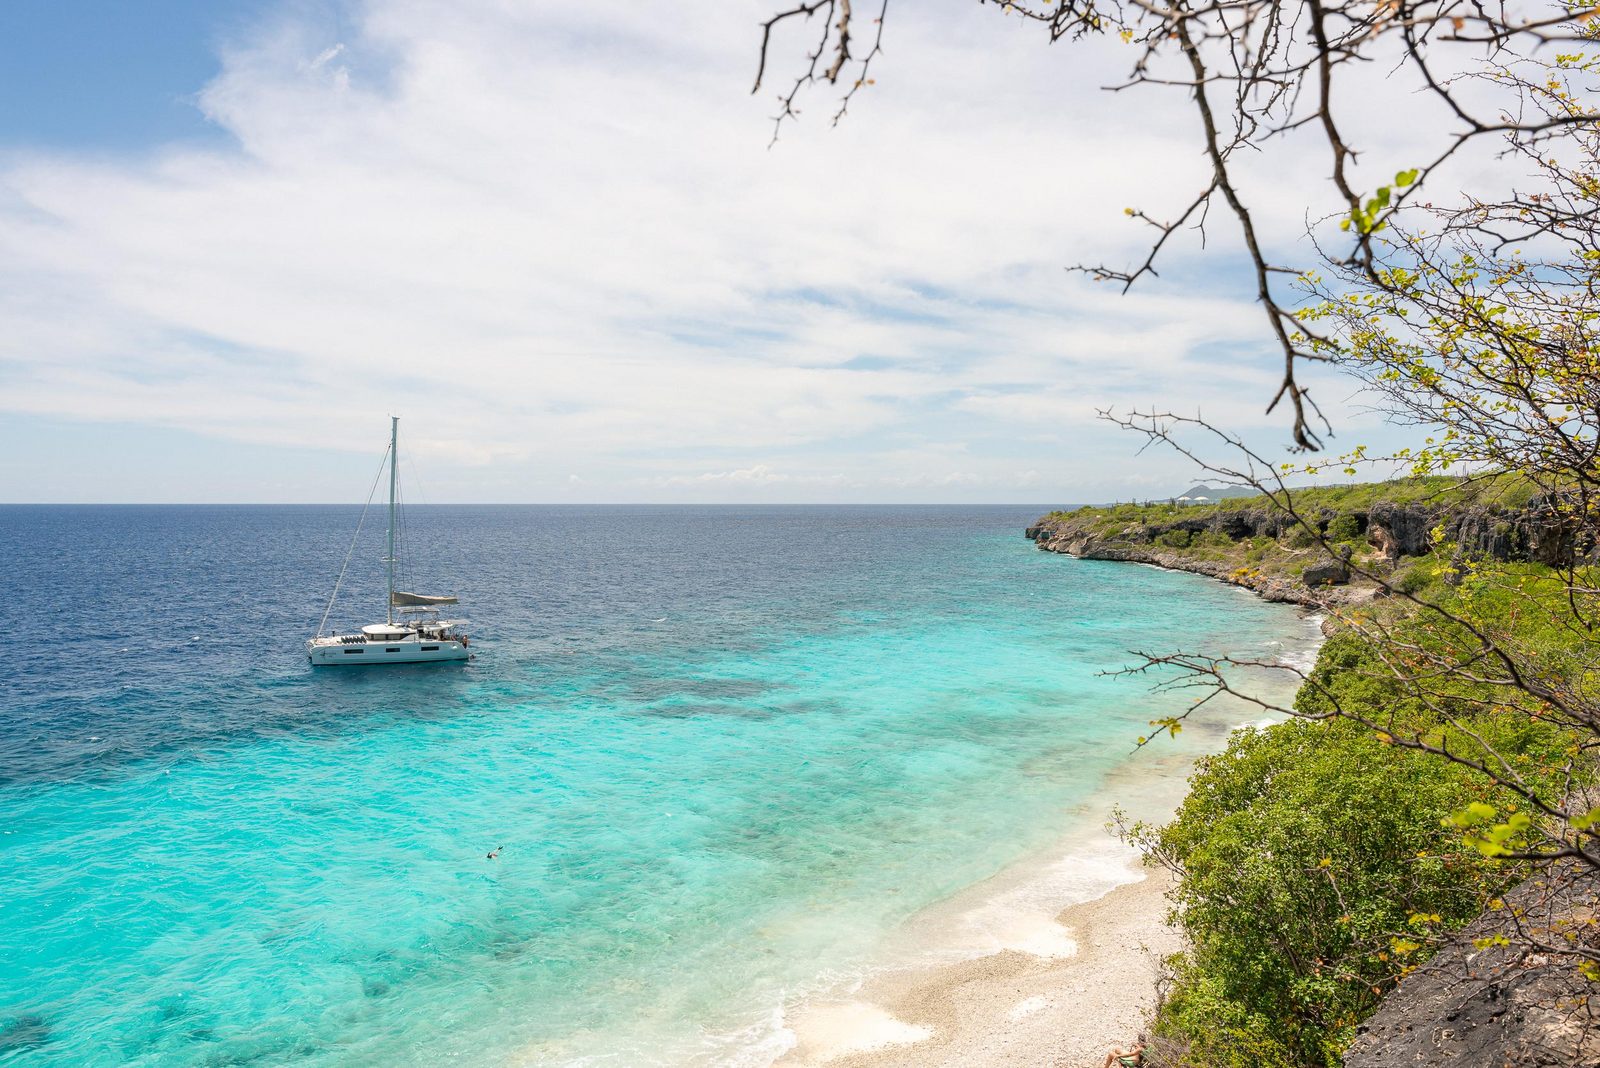 Bonaire is the ideal island to enjoy your vacation, including a stay with the kids. After all, Resort Bonaire is a child-friendly resort. Read more about our resort.